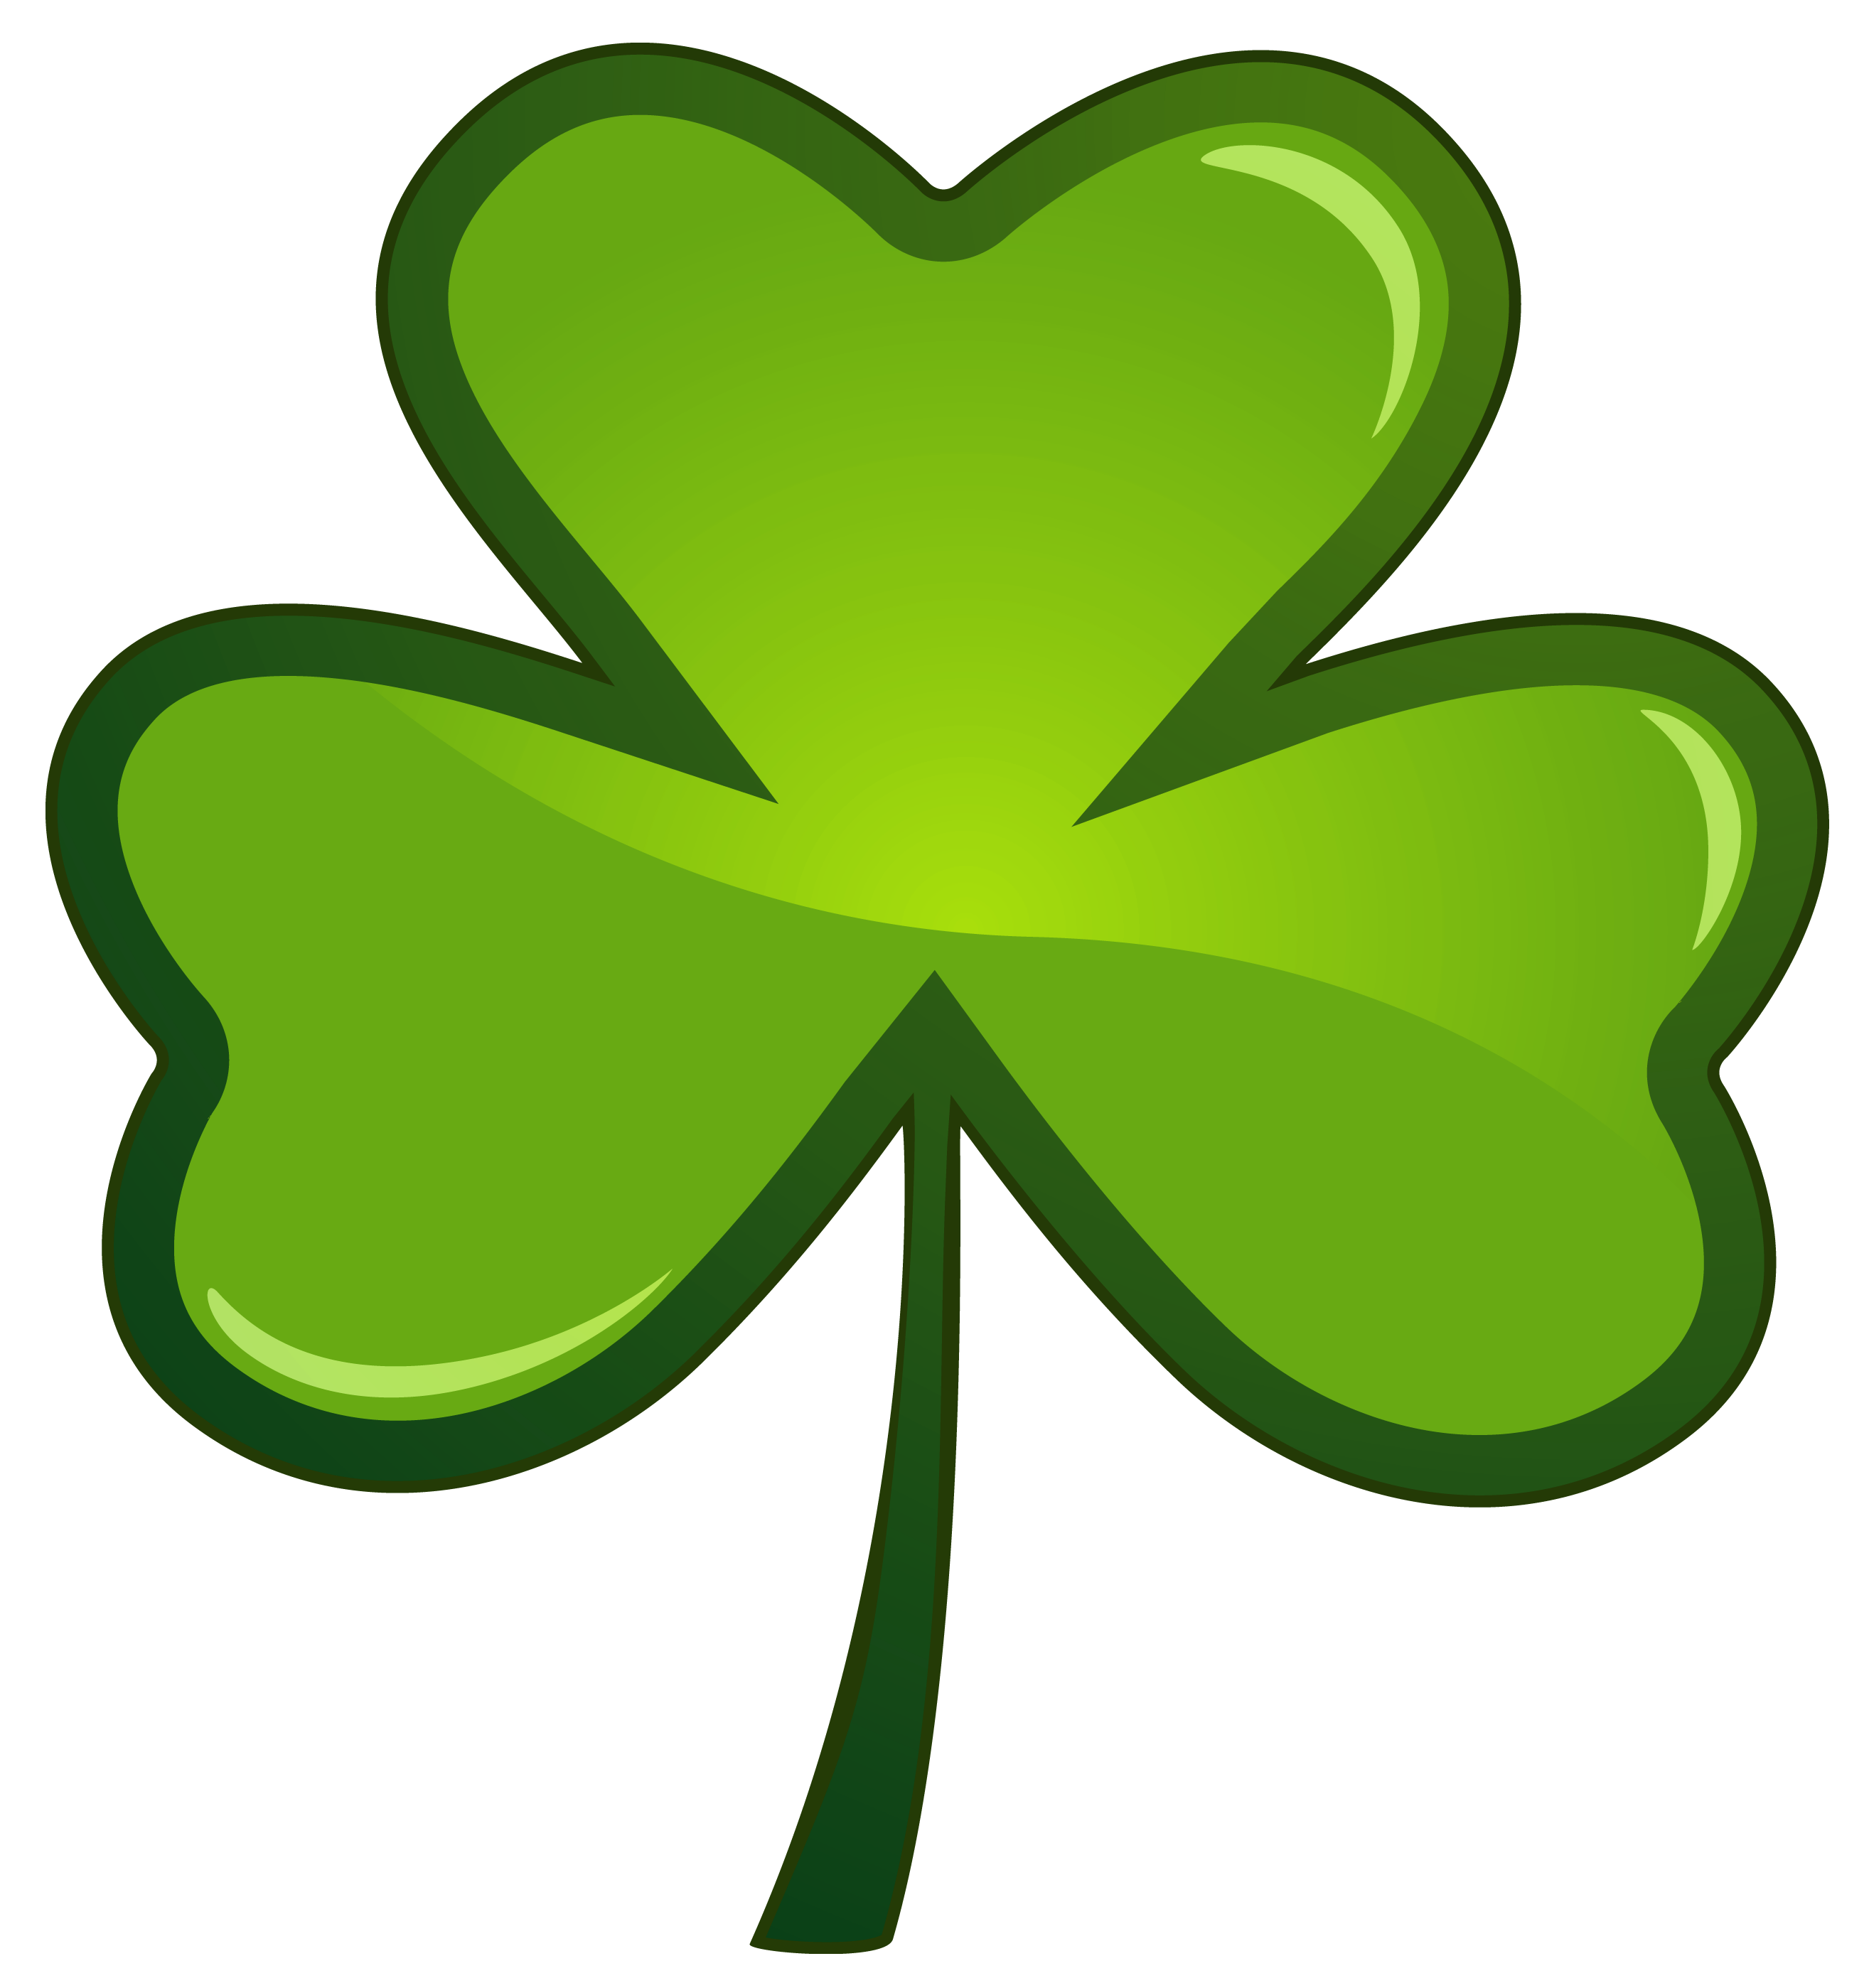 free clipart images st patricks day - photo #2